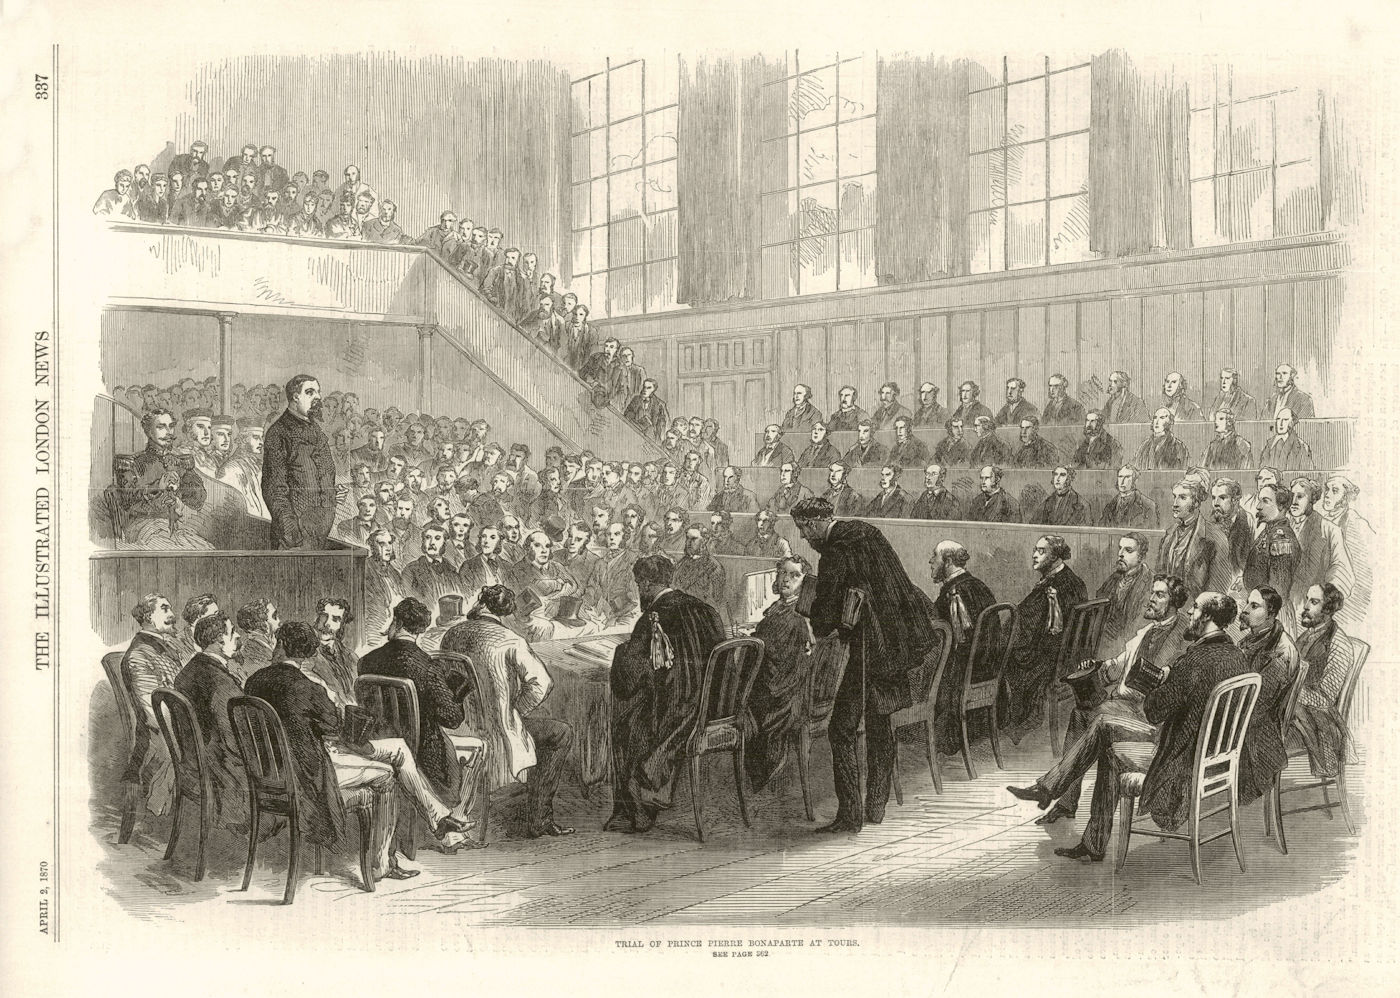 Associate Product Trial of Prince Pierre Bonaparte at Tours. Law 1870 antique ILN full page print